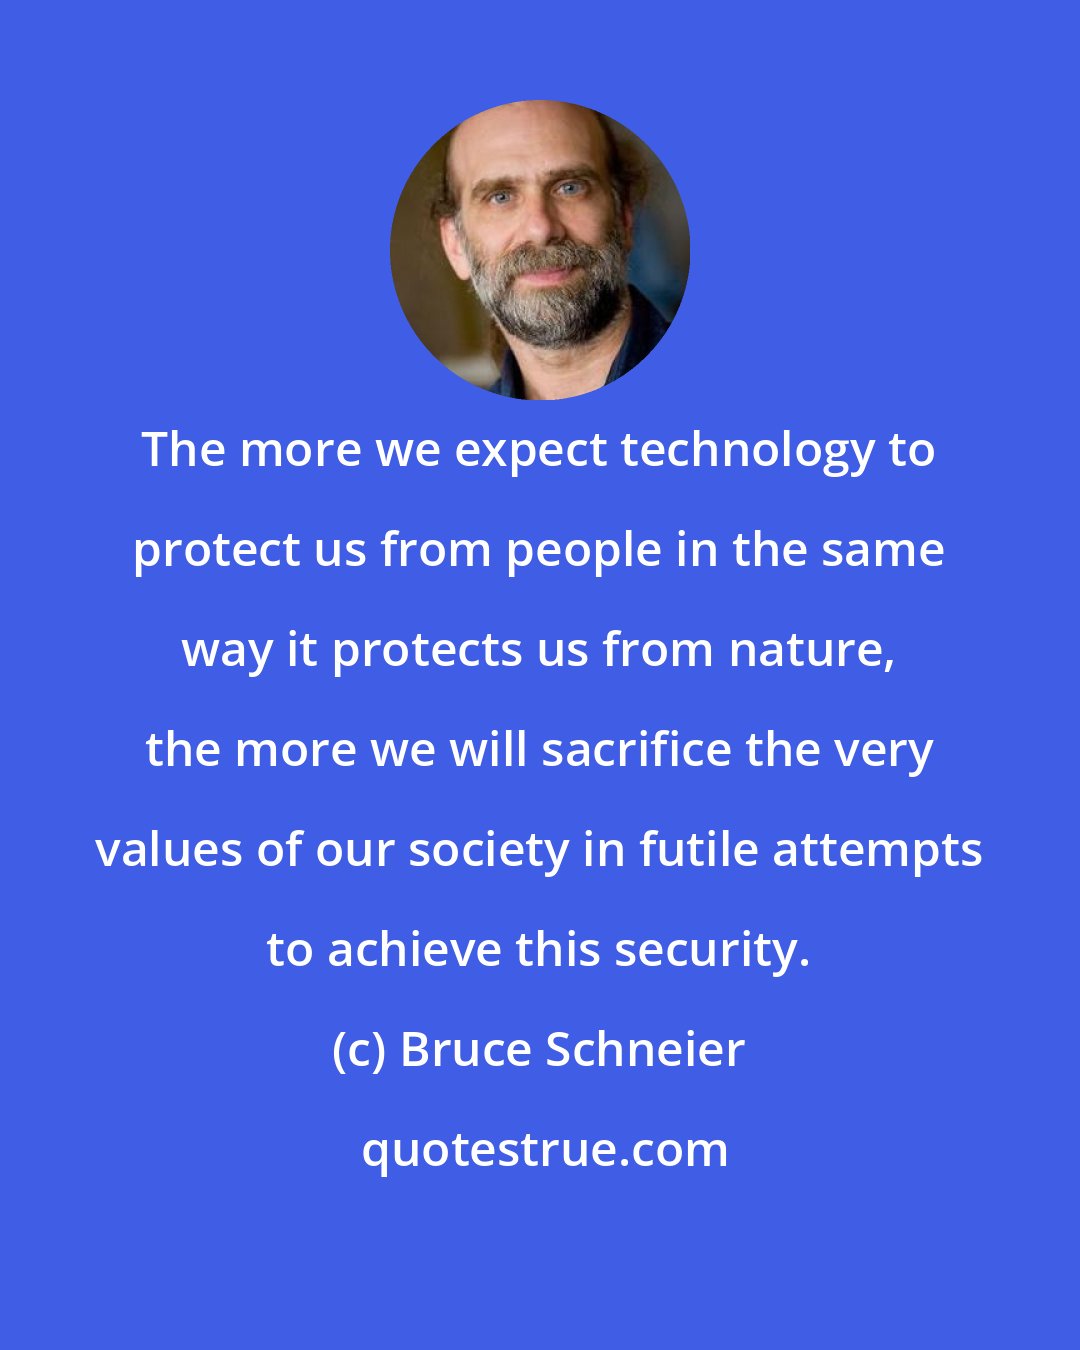 Bruce Schneier: The more we expect technology to protect us from people in the same way it protects us from nature, the more we will sacrifice the very values of our society in futile attempts to achieve this security.